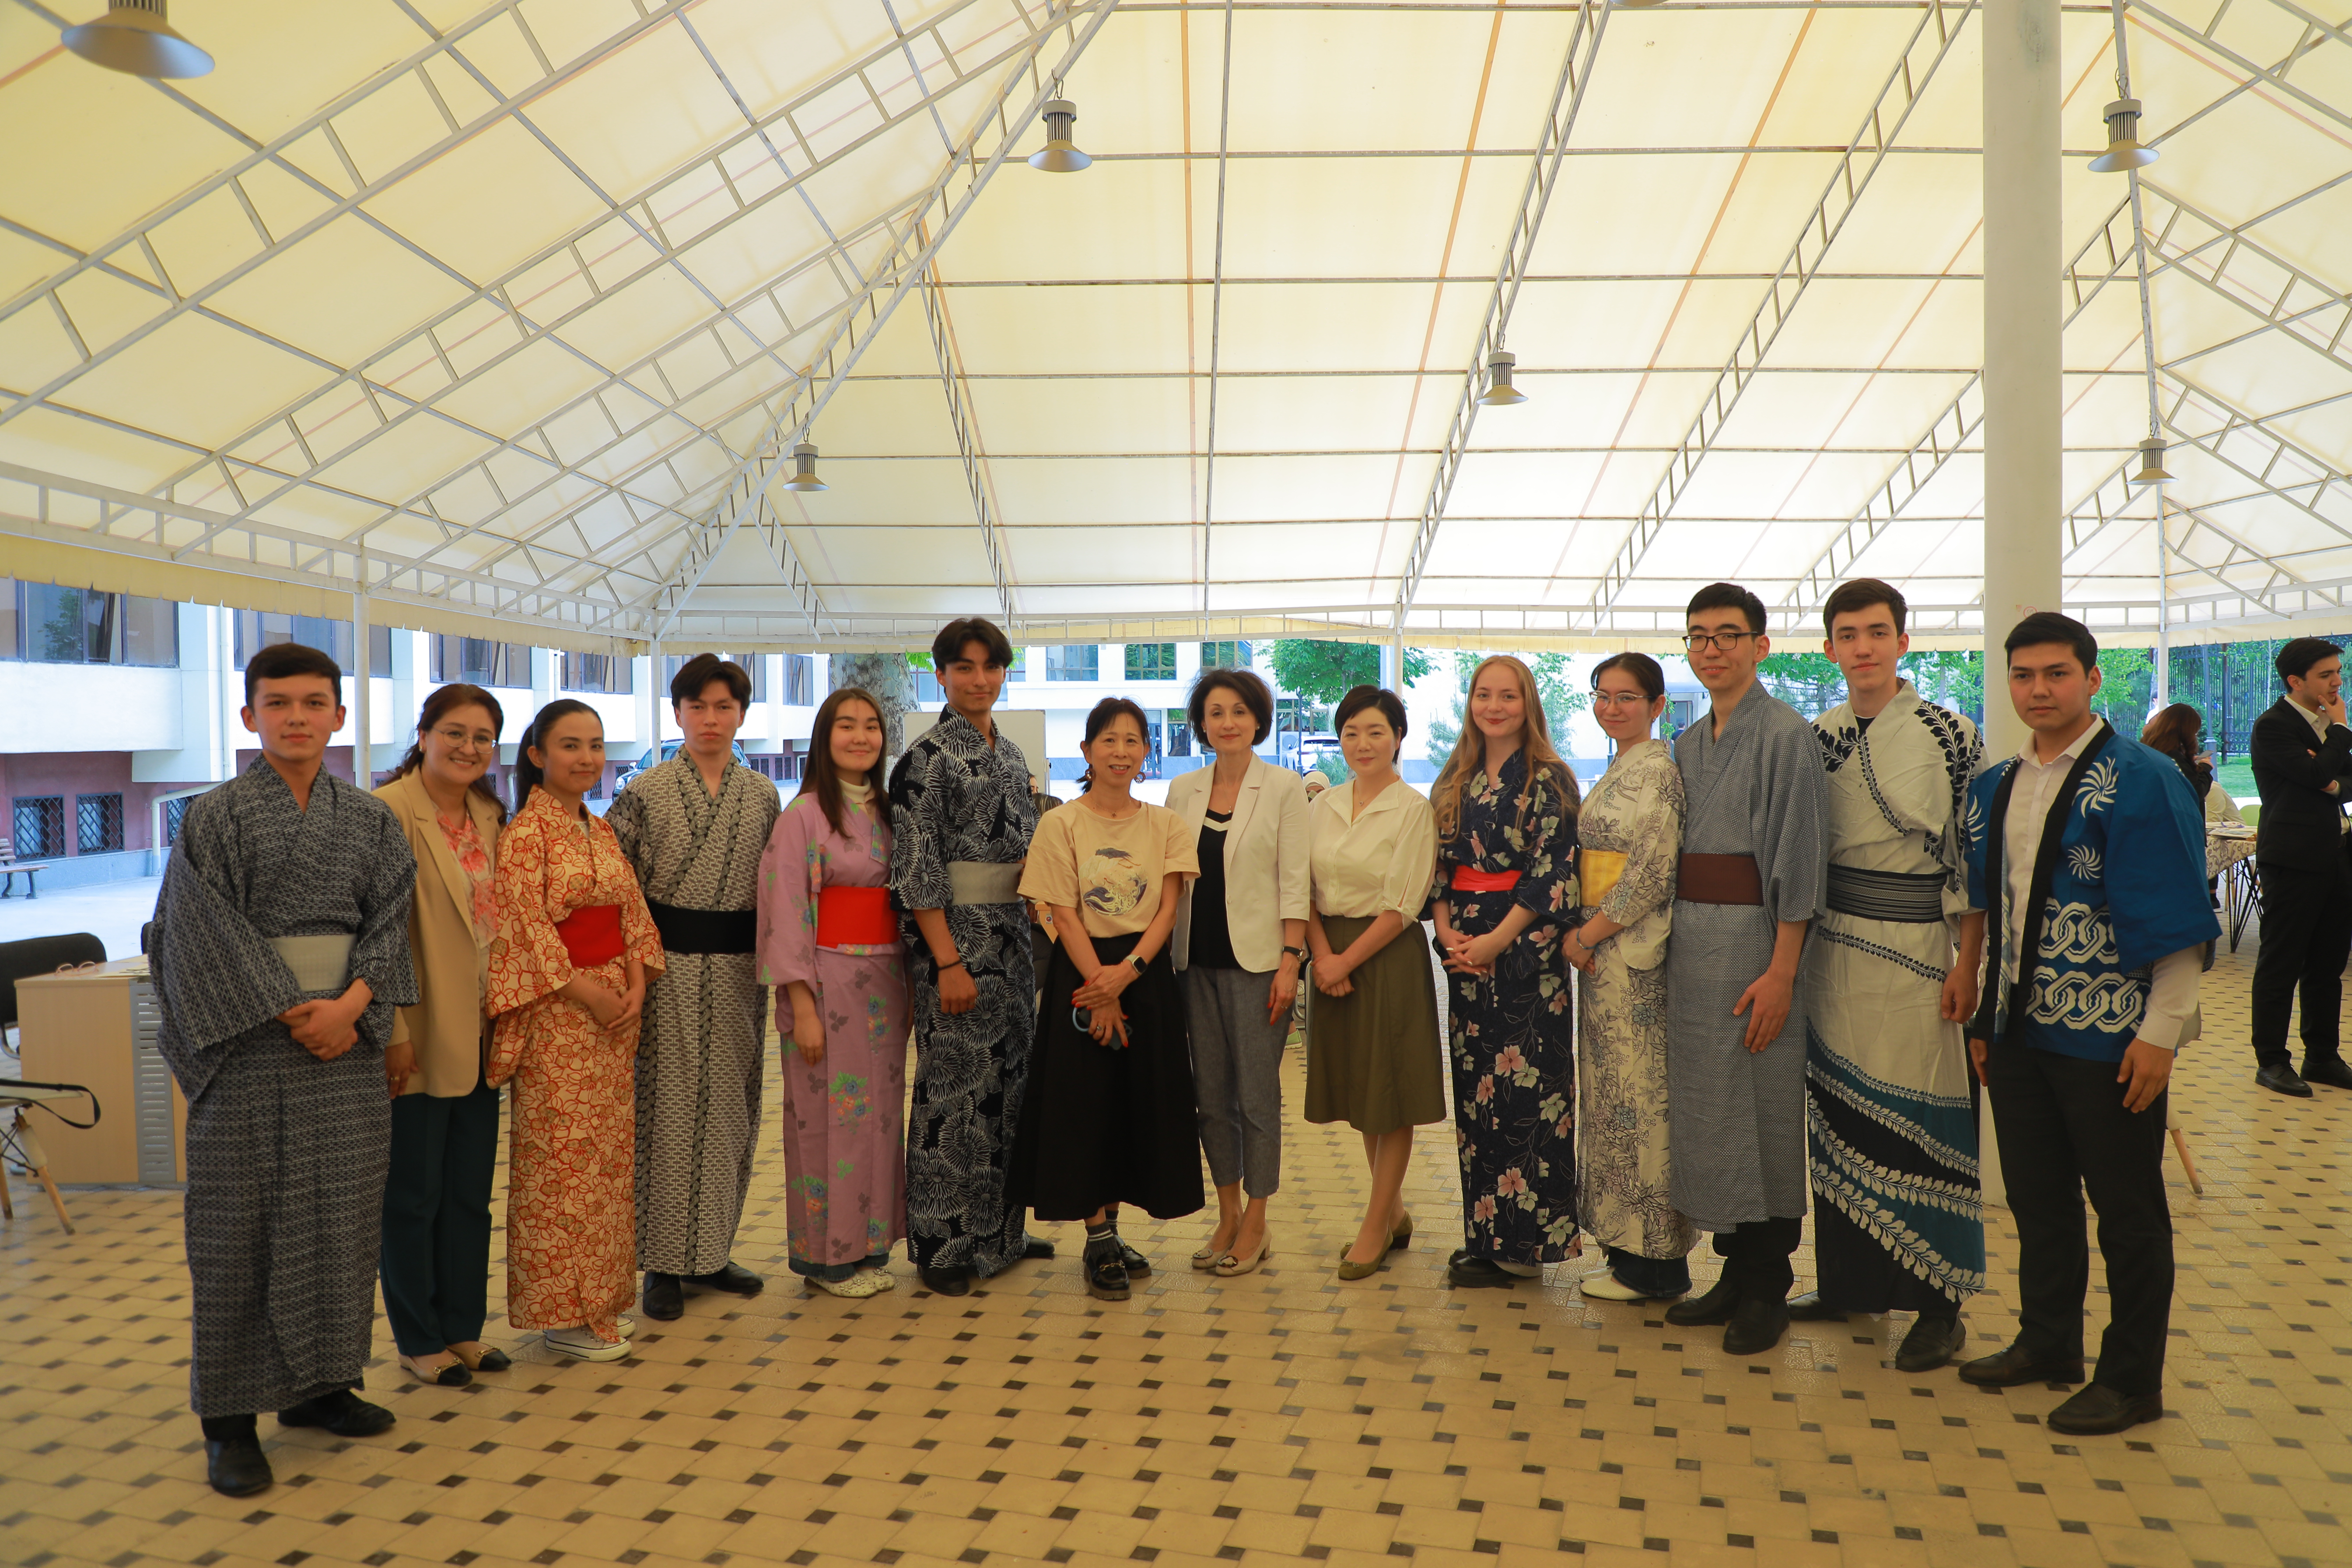 A celebration of Japanese culture was held at the University of World Economy and Diplomacy